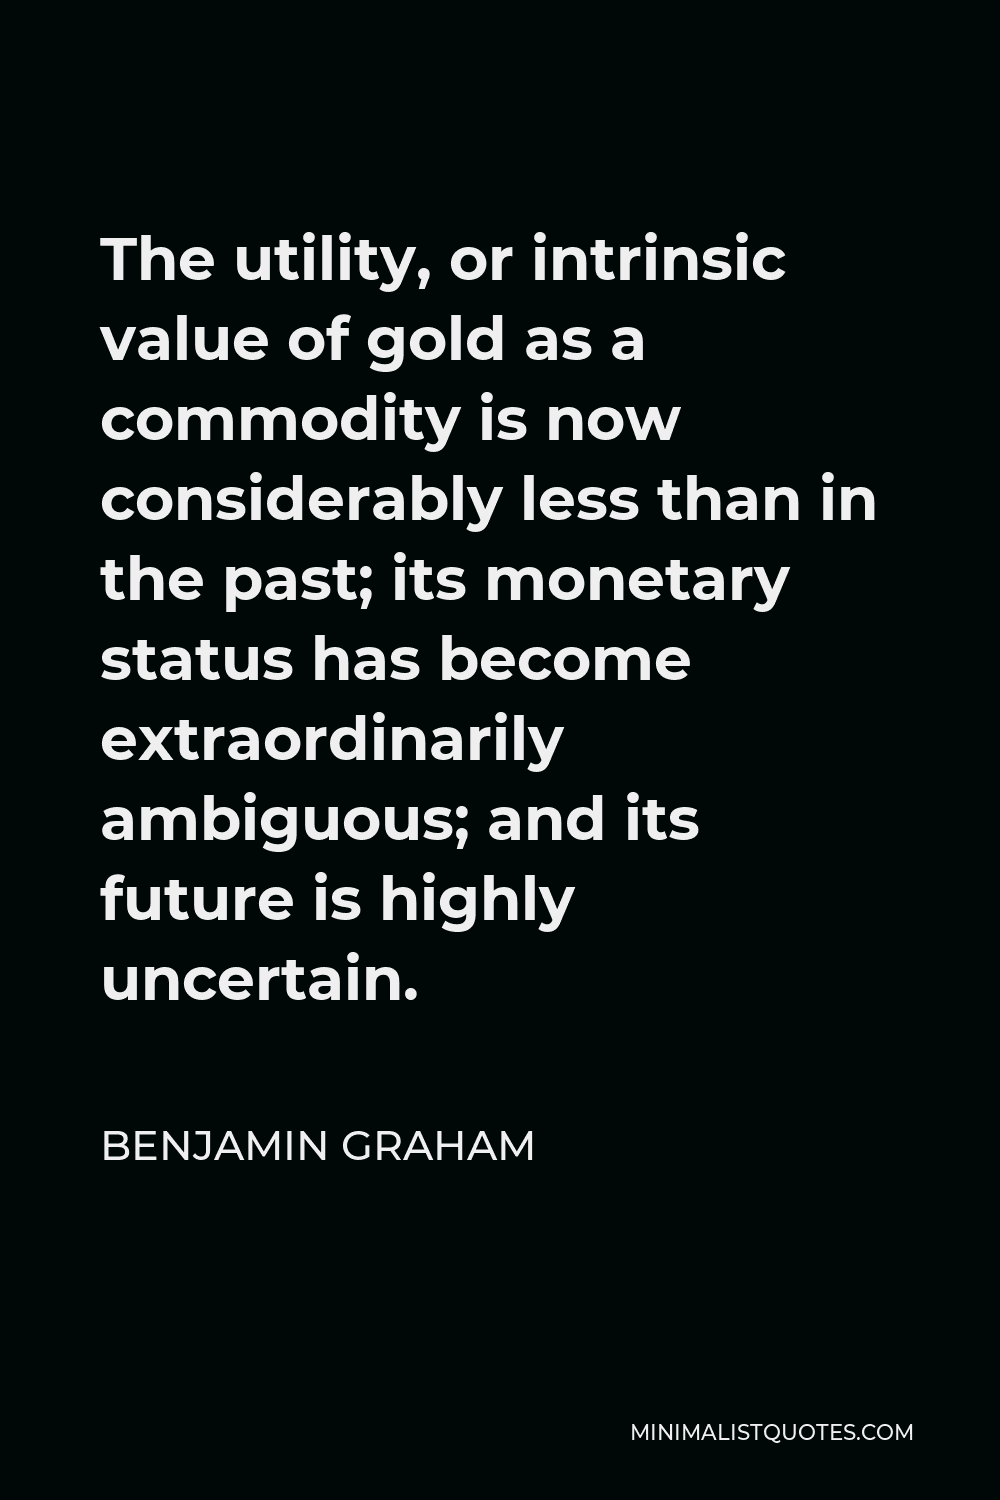 Benjamin Graham Quote - The utility, or intrinsic value of gold as a commodity is now considerably less than in the past; its monetary status has become extraordinarily ambiguous; and its future is highly uncertain.